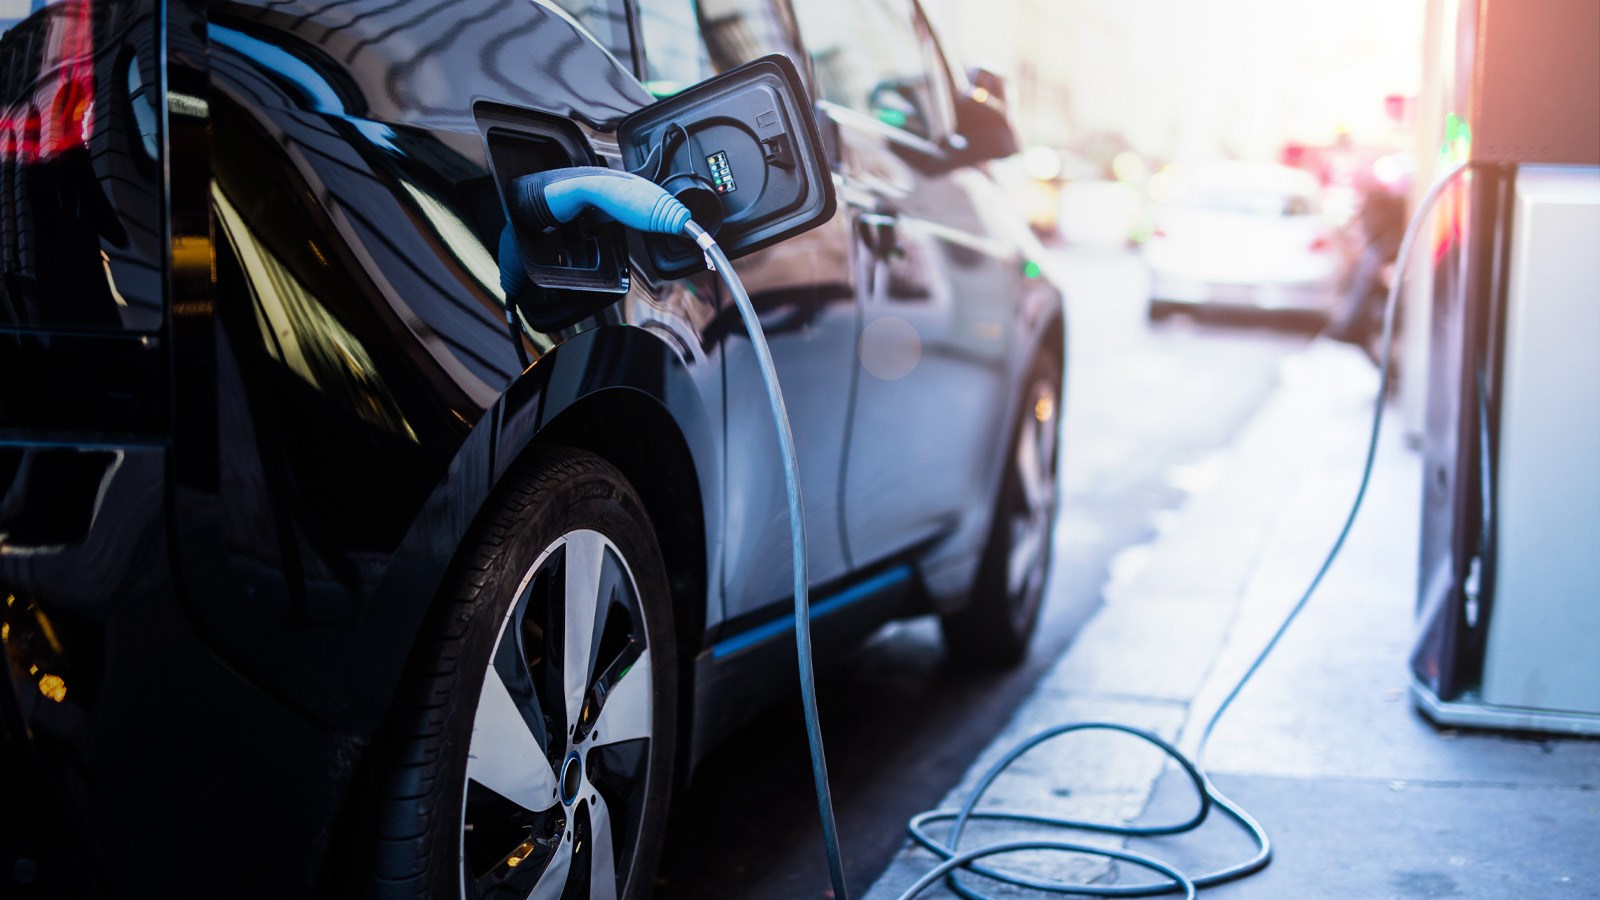 AUTOSAR-compliant software to expand the range of charging solutions for electric vehicles